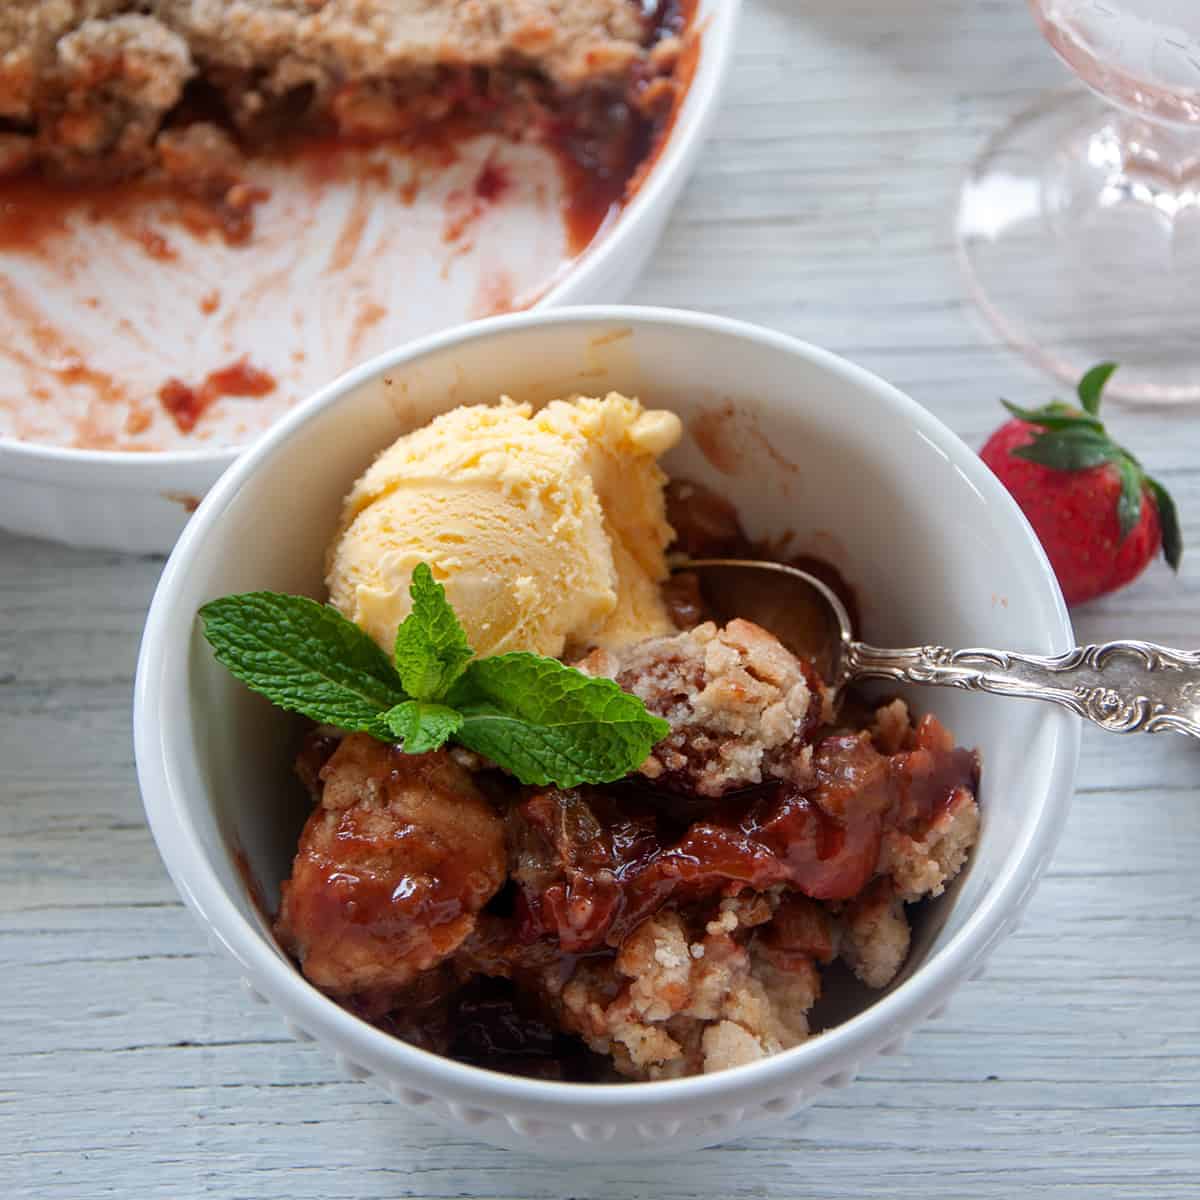 One serving of Strawberry Rhubarb Cobbler with a side of ice cream and garnished with a few leaves of mint. This is served in a white bowl with a silver spoon.